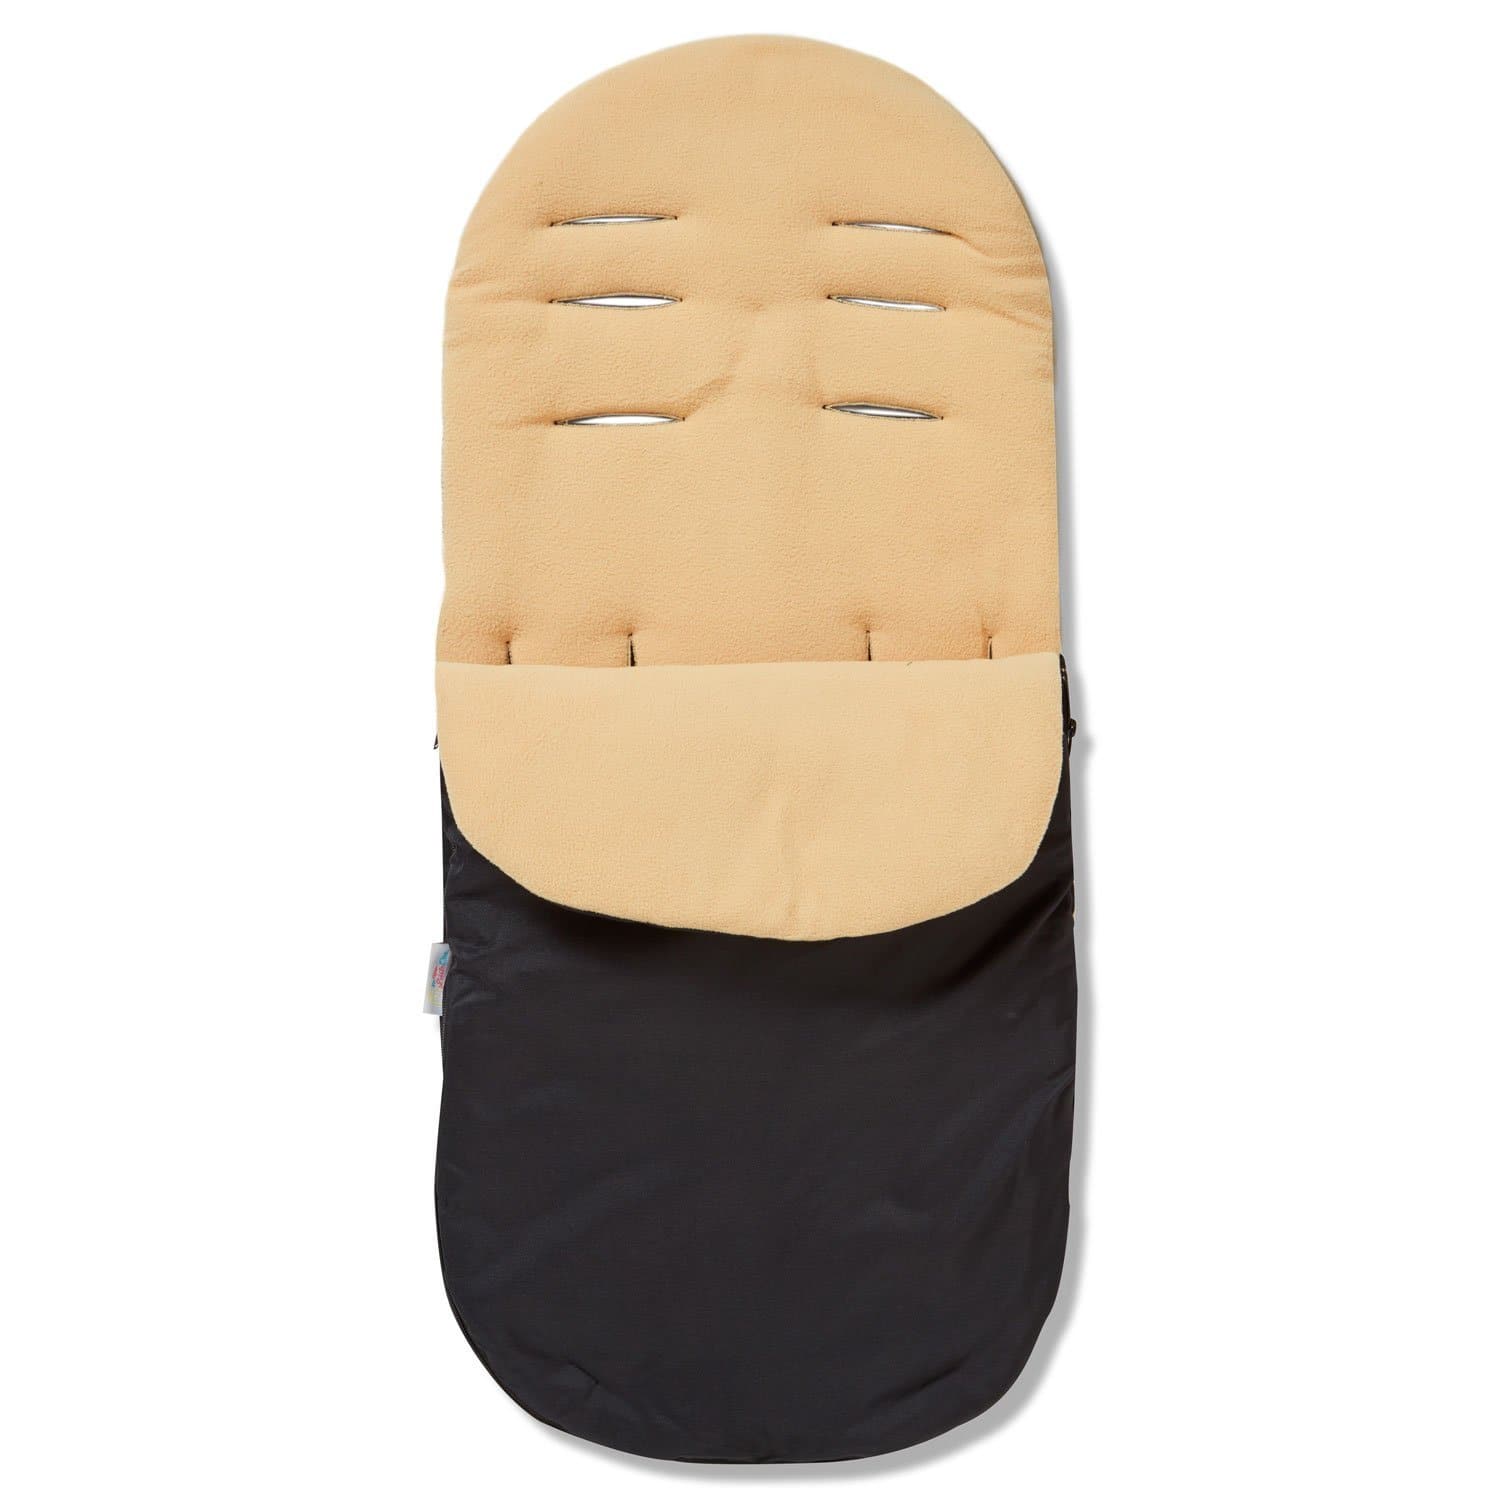 Footmuff / Cosy Toes Compatible with Bebecar - Sand / Fits All Models | For Your Little One